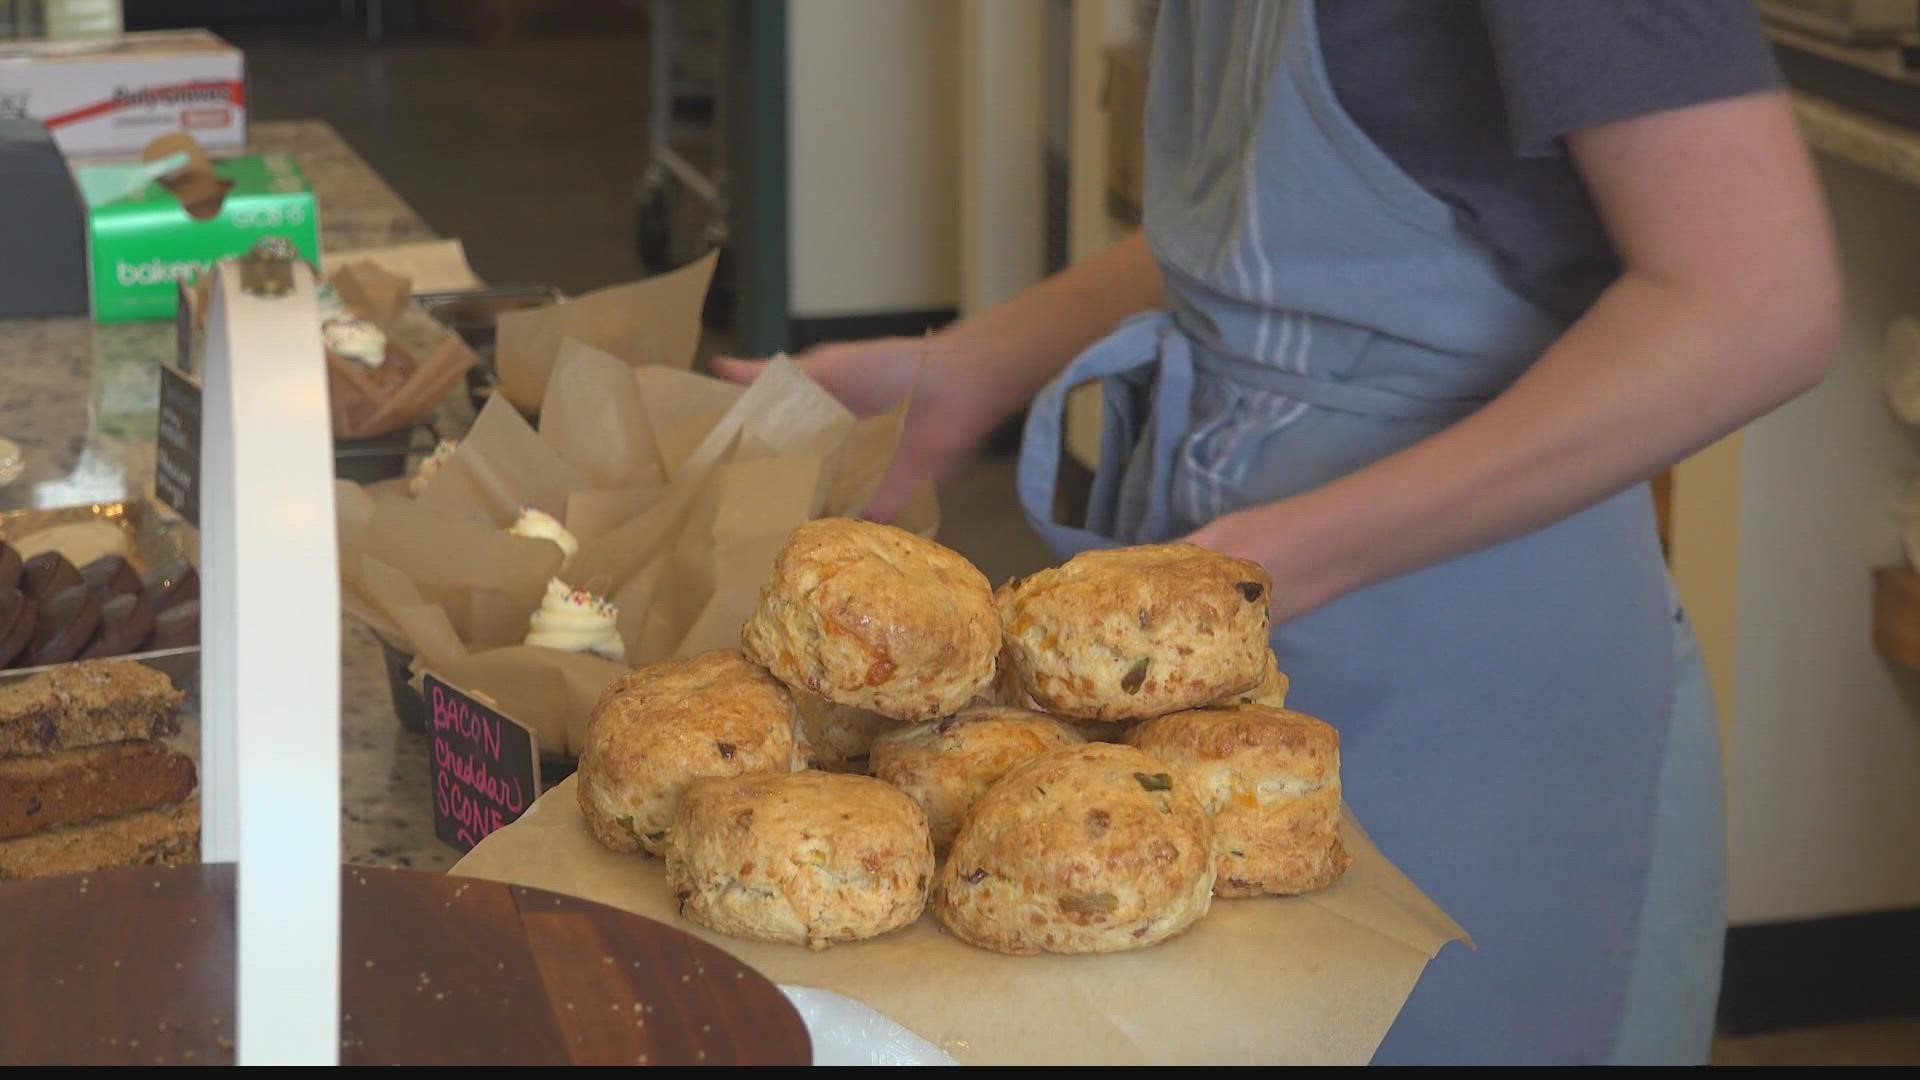 One family-owned bakery in Huntsville is excited to see all of the new business that restaurant week will bring.